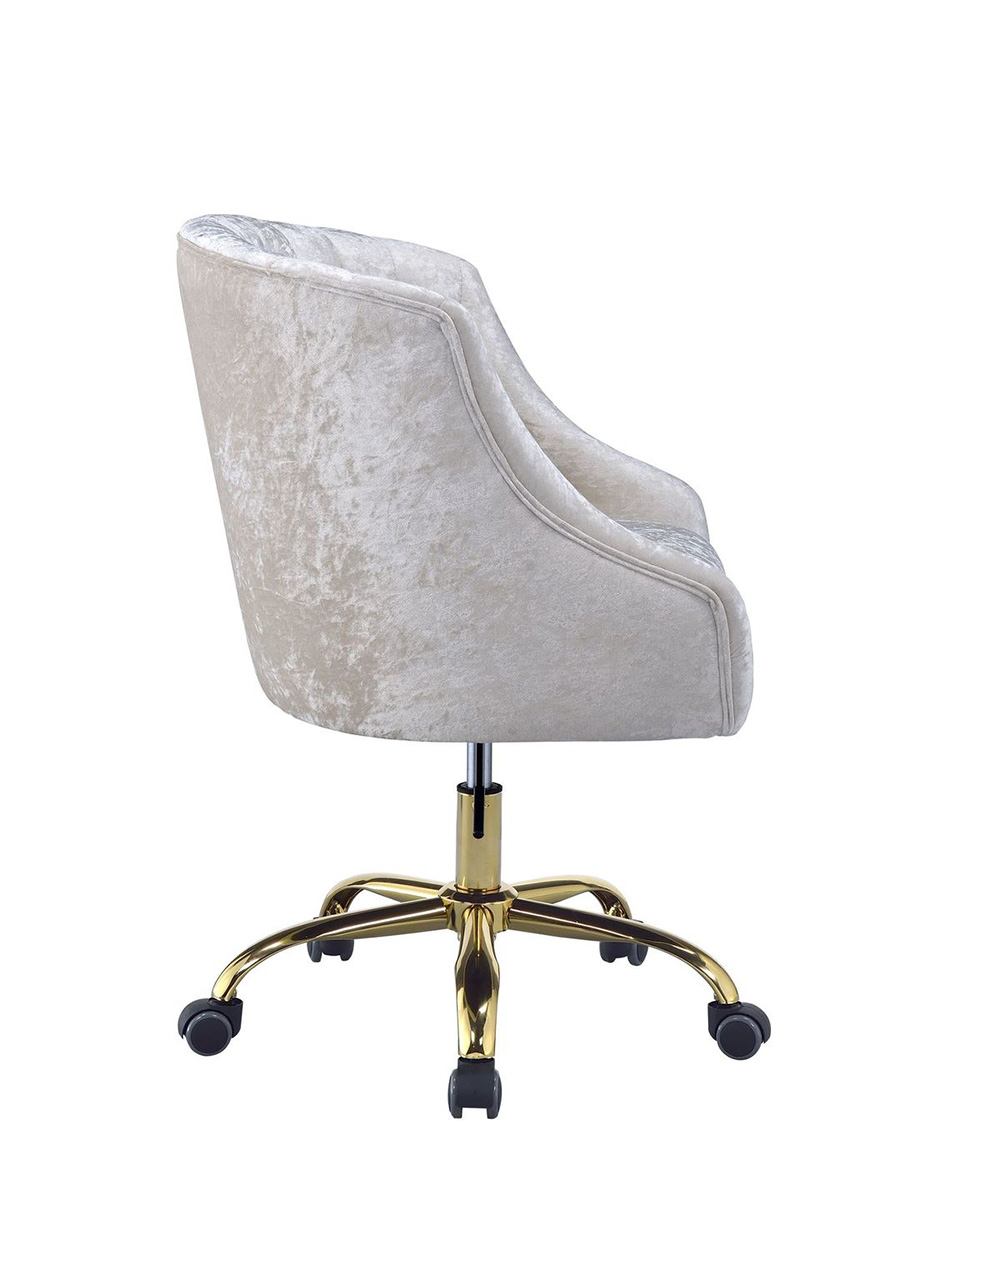 ACME Levian Modern Leisure Velvet Swivel Chair Height Adjustable with Curved Backrest and Casters for Living Room, Bedroom, Dining Room, Office - Cream